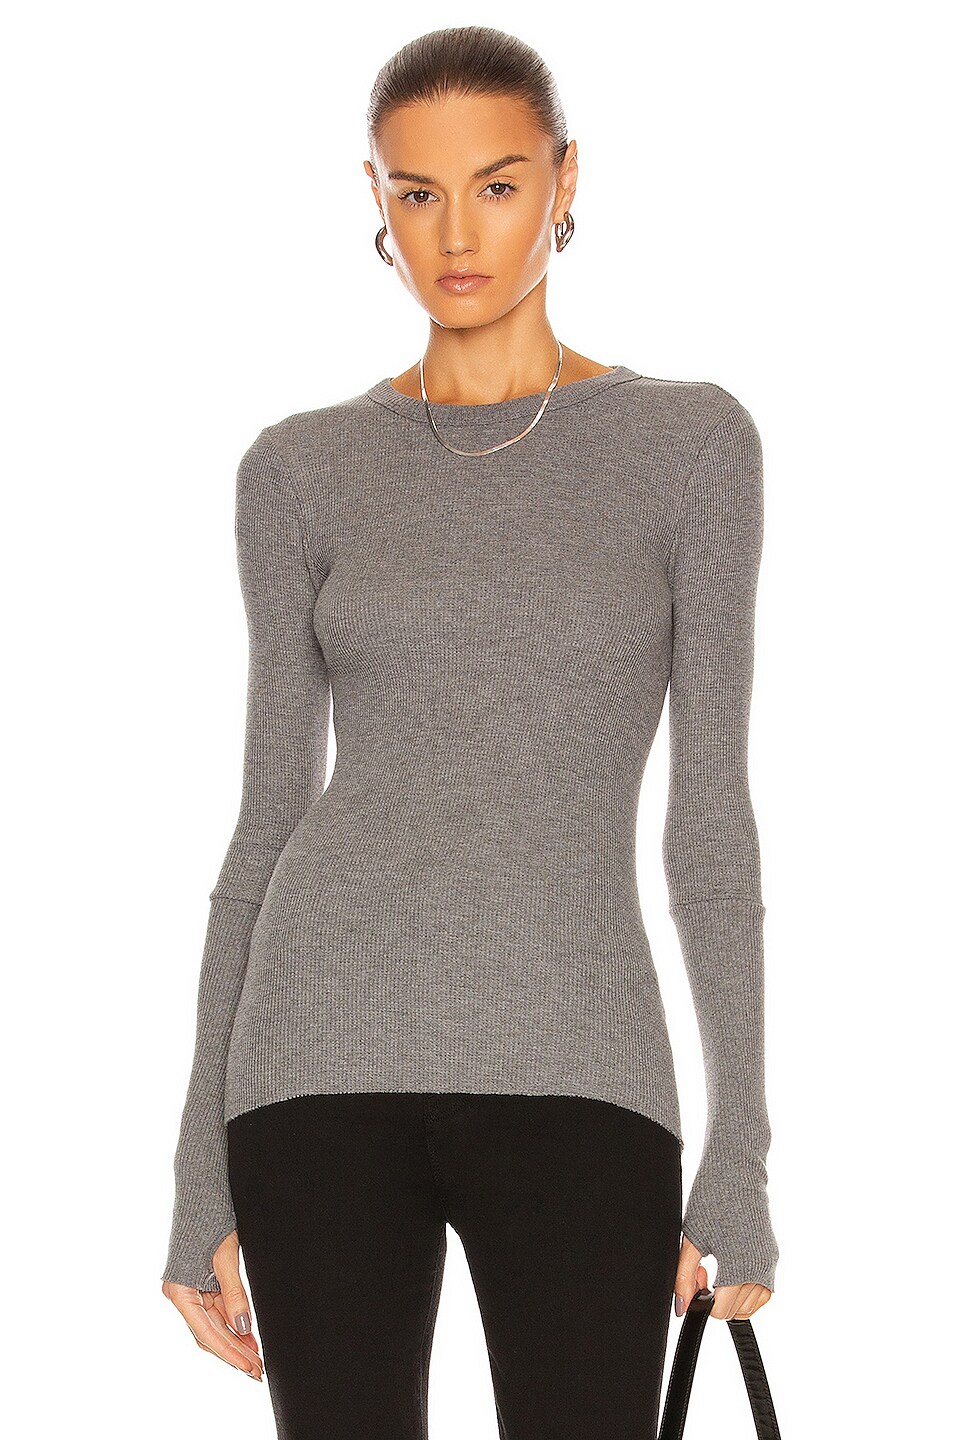 Image 1 of Enza Costa Laundered Cotton Thermal Long Sleeve Cuffed Crew Top in Graphite Heather